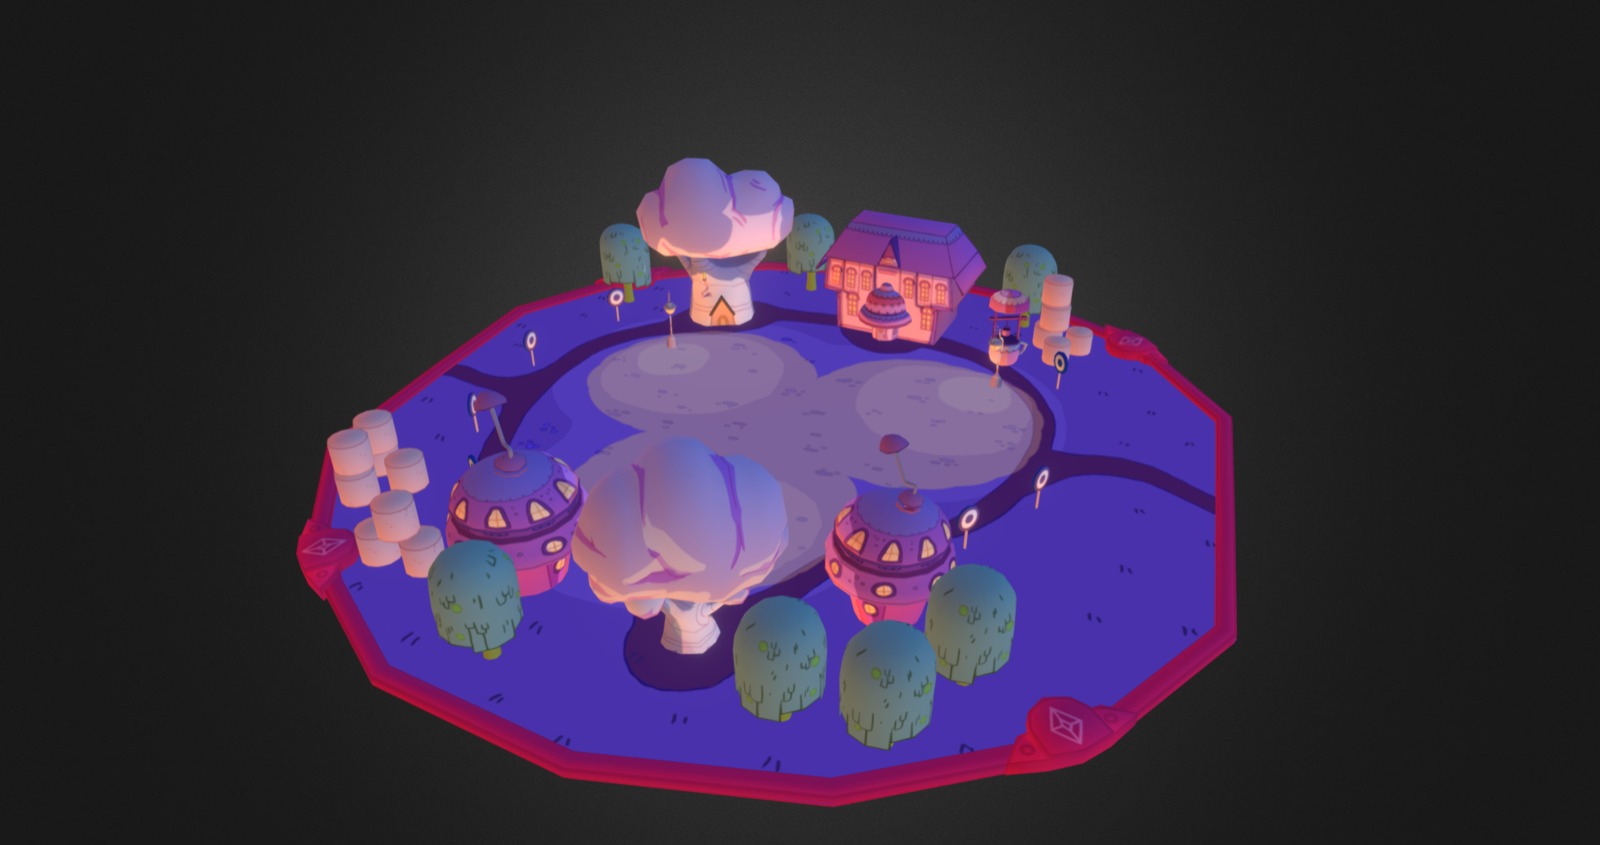 Candy Kingdom gameboard done for Adventure Time: Card Wars Kingdom mobile game - Card Wars Kingdom - Candy Kingdom GameBoard - 3D model by Alex Borjas (@alexborjas) 3d model